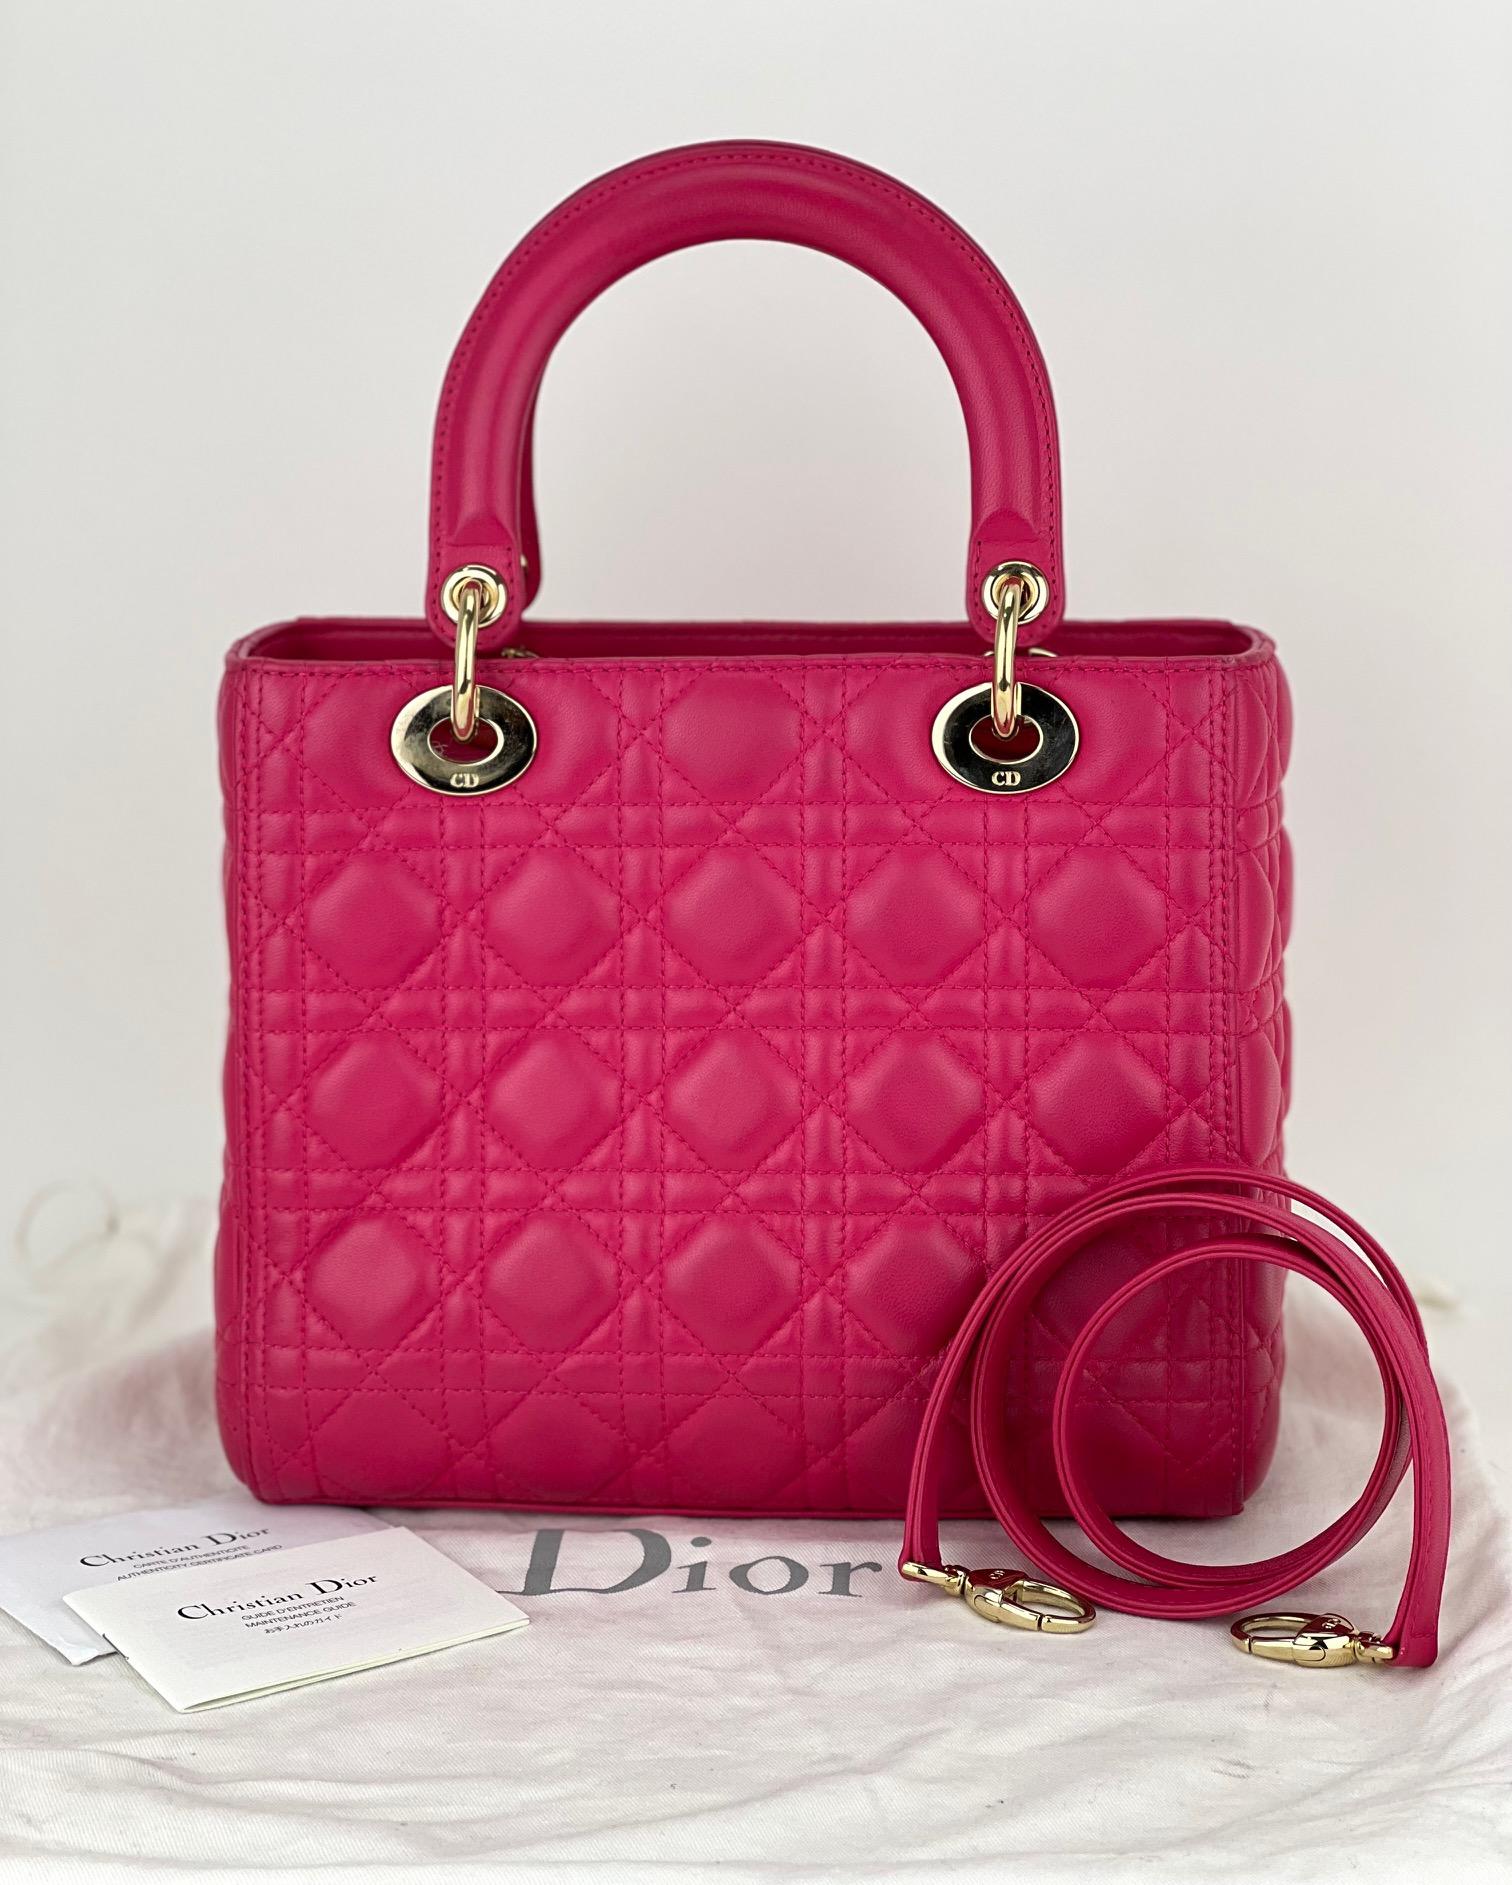 Pre-Owned  100% Authentic
Christian Dior Lambskin Cannage
Medium Pink Lady Dior
RATING: B...Very Good, well maintained,
shows minor signs of wear
MATERIAL: lambskin leather
STRAP: Dior Removable leather Strap 34.5'' long
DROP: 17''
HANDLE:  double